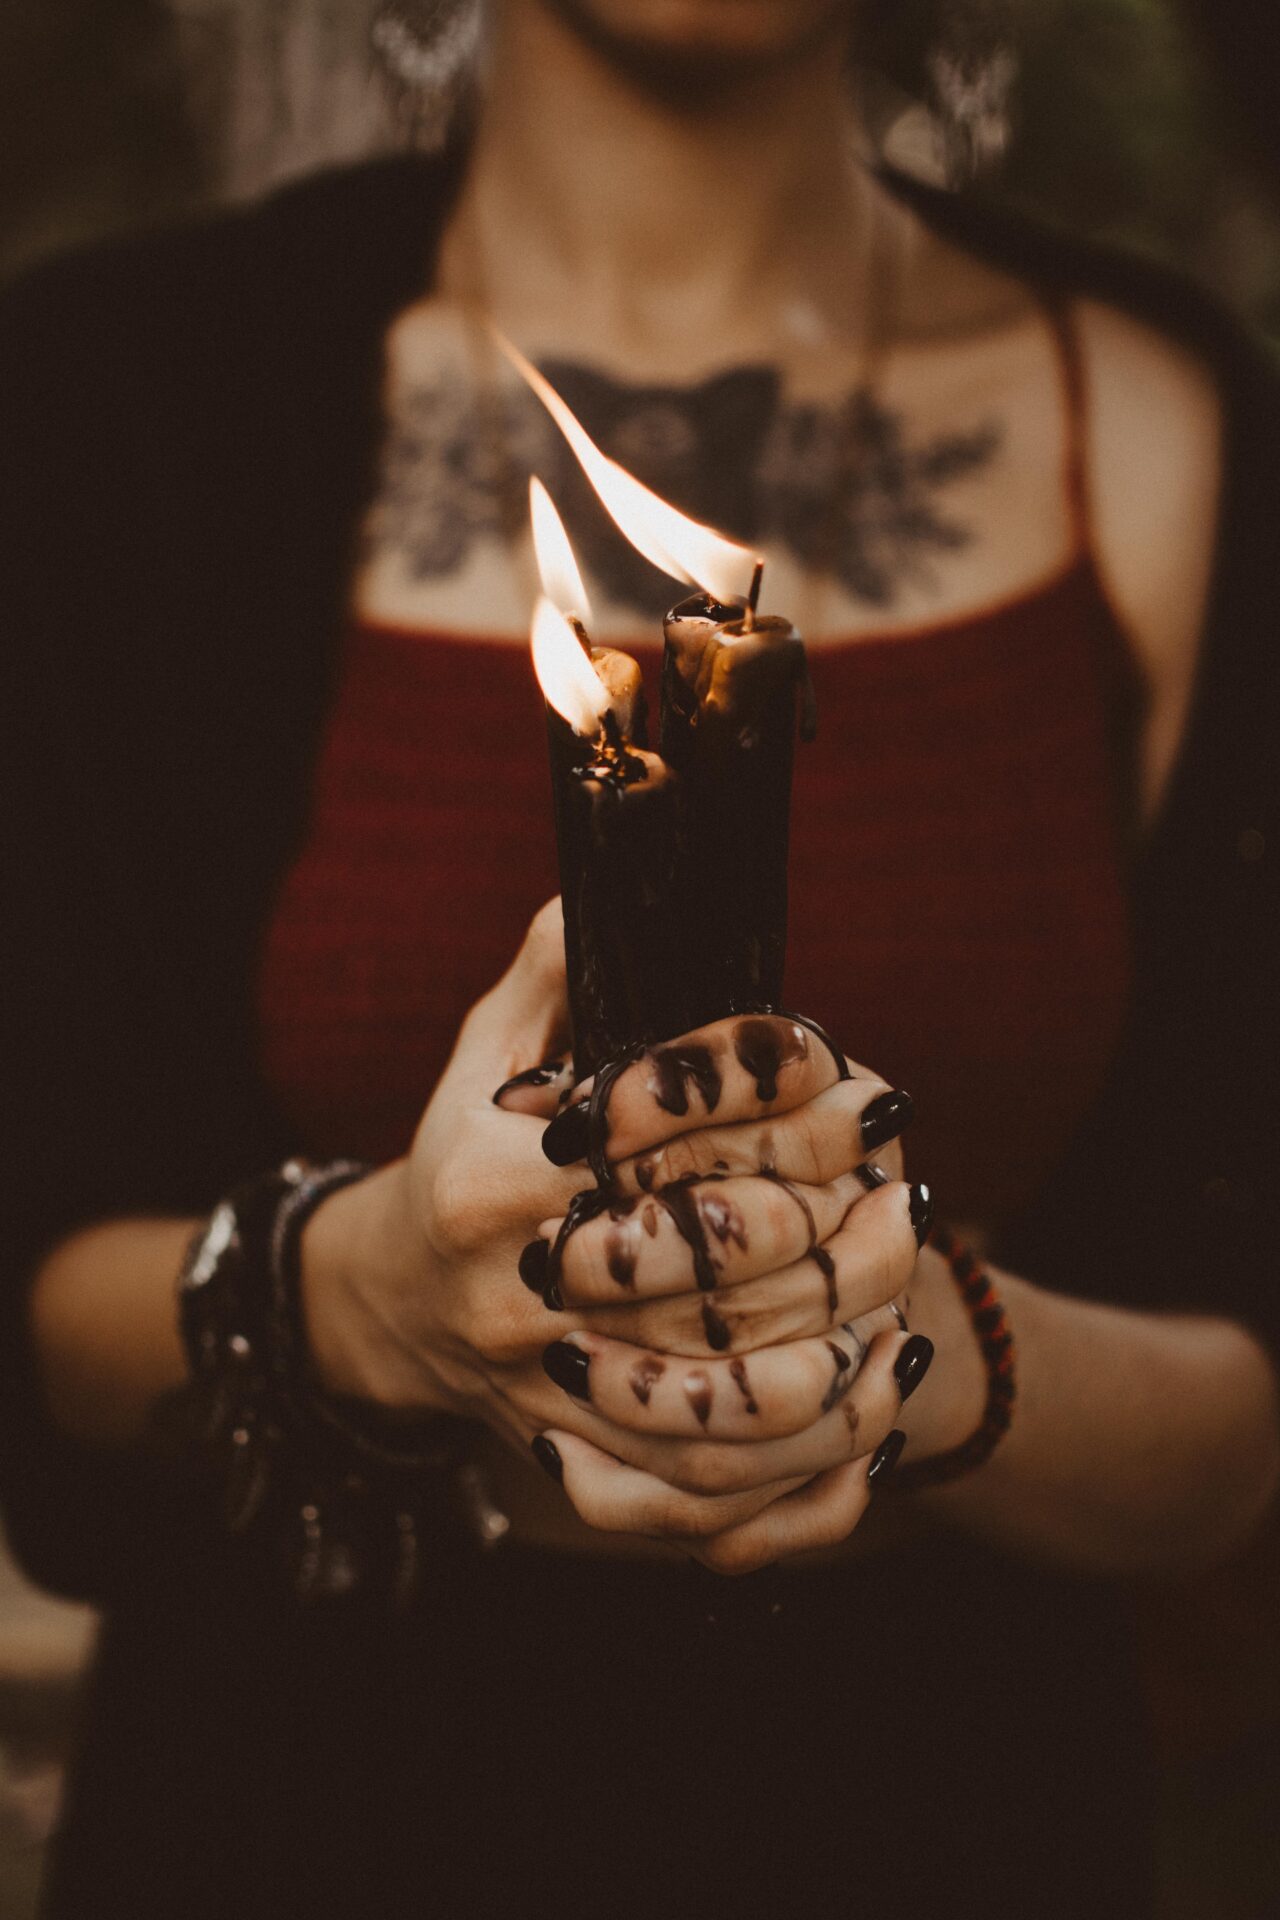 Things to research as a beginner witch